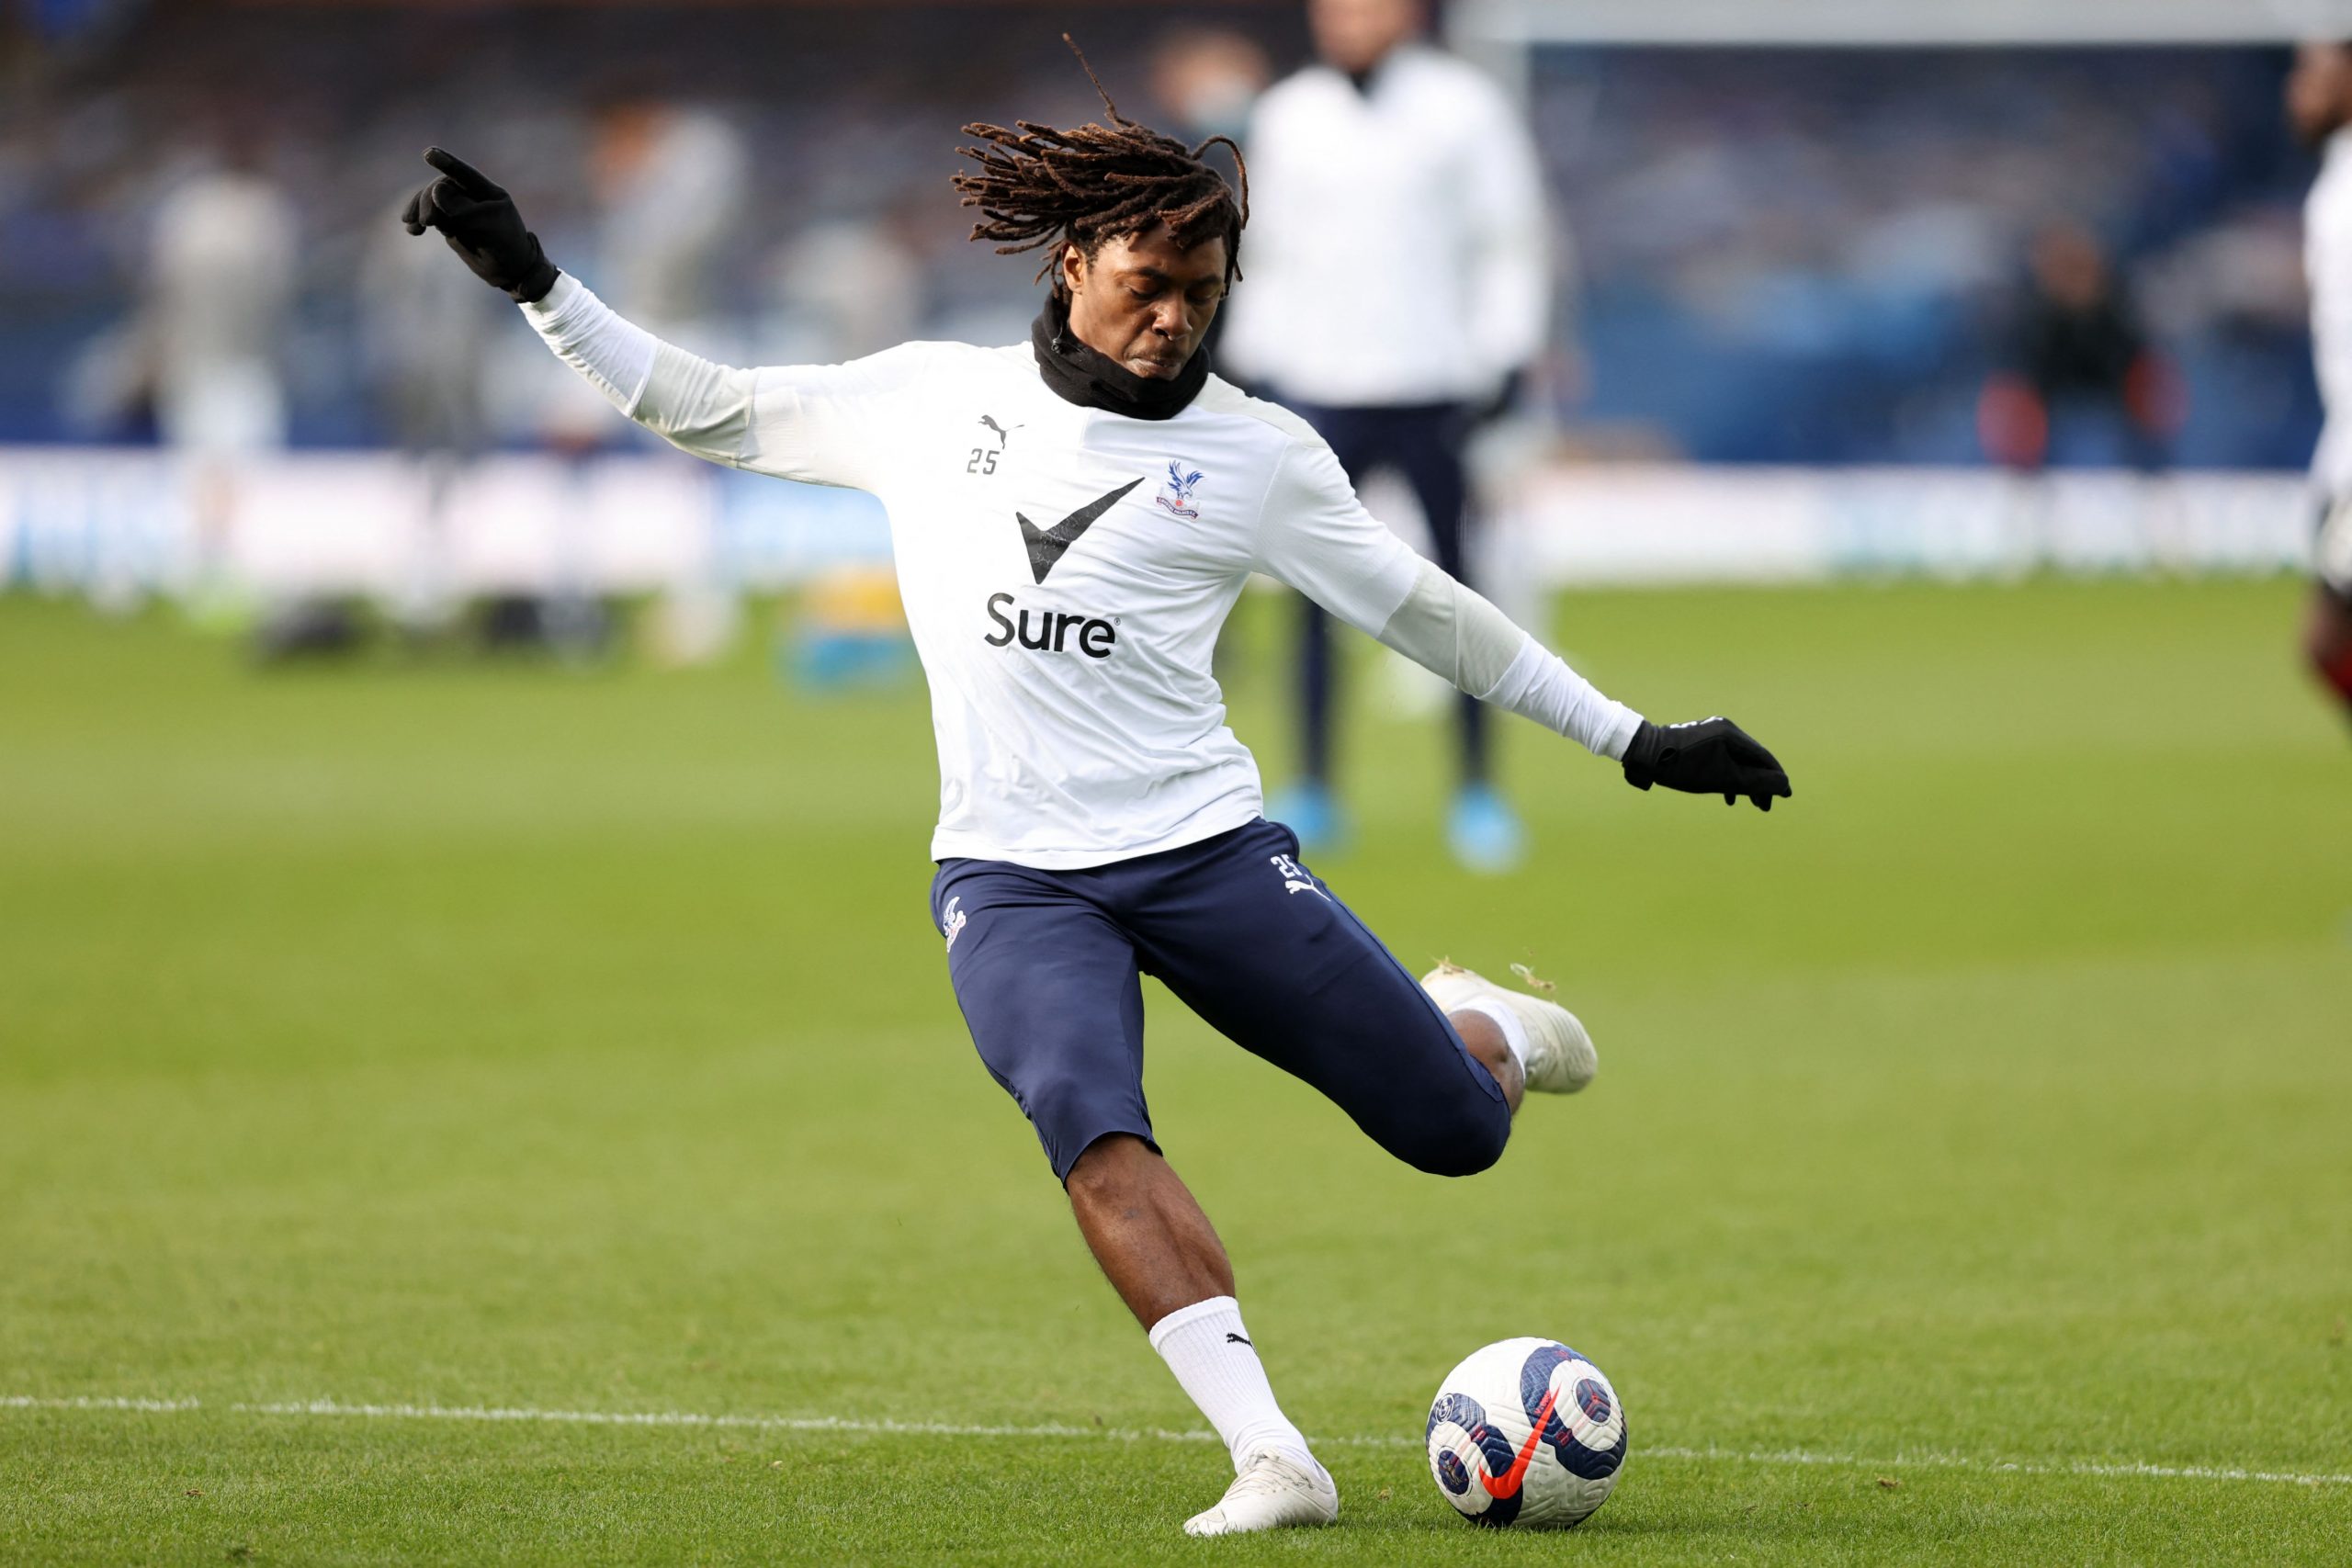 Crystal Palace's English midfielder Eberechi Eze warms up ahead of the English Premier League football match between Everton and Crystal Palace at Goodison Park in Liverpool, north west England on April 5, 2021. - RESTRICTED TO EDITORIAL USE. No use with unauthorized audio, video, data, fixture lists, club/league logos or 'live' services. Online in-match use limited to 120 images. An additional 40 images may be used in extra time. No video emulation. Social media in-match use limited to 120 images. An additional 40 images may be used in extra time. No use in betting publications, games or single club/league/player publications. (Photo by Clive Brunskill / POOL / AFP) / RESTRICTED TO EDITORIAL USE. No use with unauthorized audio, video, data, fixture lists, club/league logos or 'live' services. Online in-match use limited to 120 images. An additional 40 images may be used in extra time. No video emulation. Social media in-match use limited to 120 images. An additional 40 images may be used in extra time. No use in betting publications, games or single club/league/player publications. / RESTRICTED TO EDITORIAL USE. No use with unauthorized audio, video, data, fixture lists, club/league logos or 'live' services. Online in-match use limited to 120 images. An additional 40 images may be used in extra time. No video emulation. Social media in-match use limited to 120 images. An additional 40 images may be used in extra time. No use in betting publications, games or single club/league/player publications. (Photo by CLIVE BRUNSKILL/POOL/AFP via Getty Images)The 4th Official uses images provided by the following image agency: Getty Images (https://www.gettyimages.de/) and Imago Images (https://www.imago-images.de/).